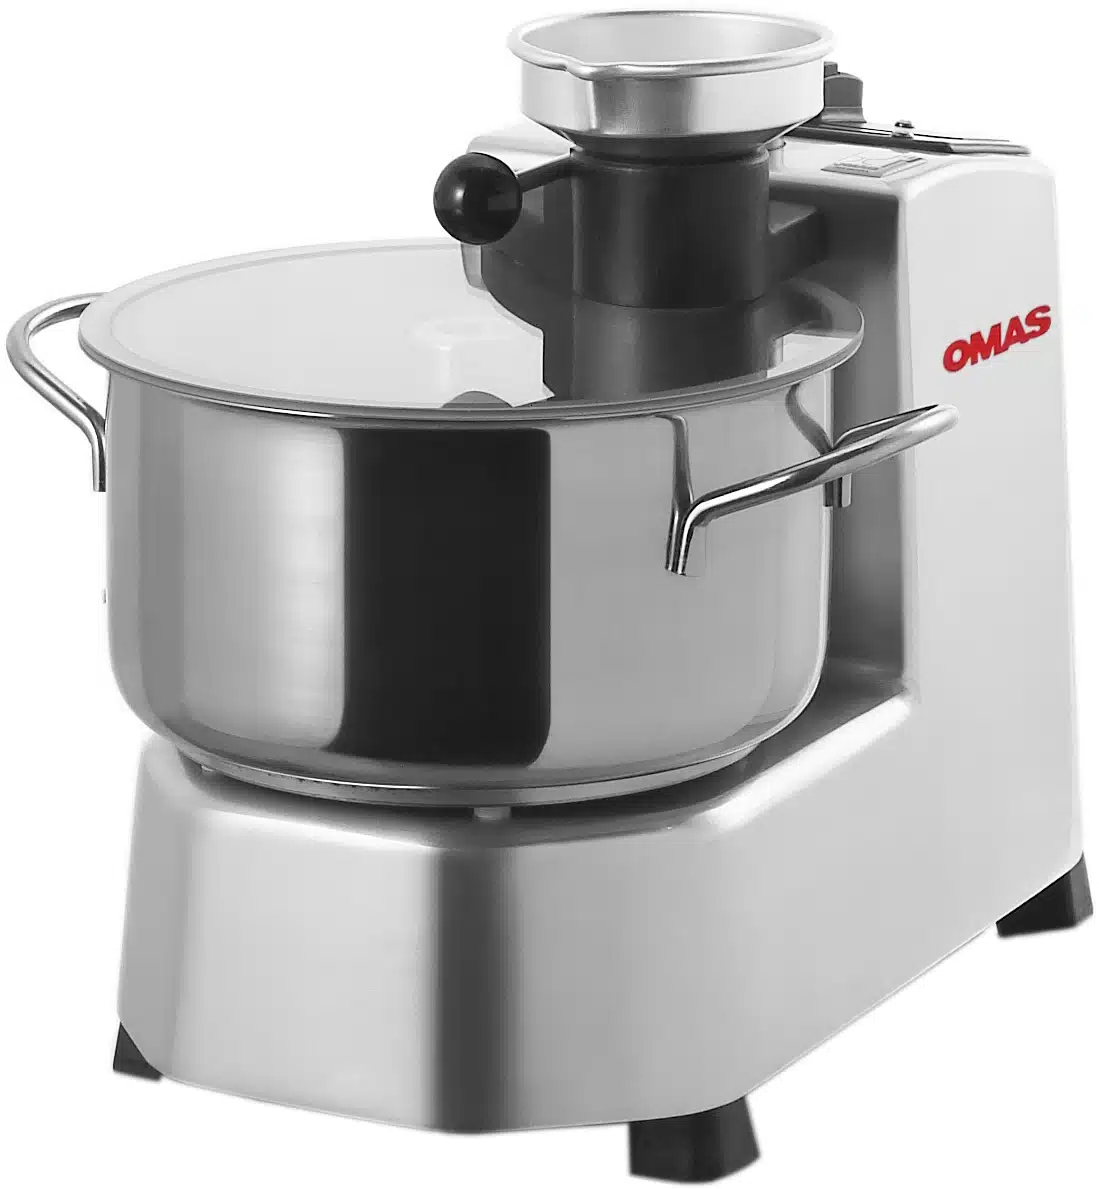 FP 35 Food Processor features a stainless-steel food bowl and cutting group, a transparent Perspex lid for product monitoring